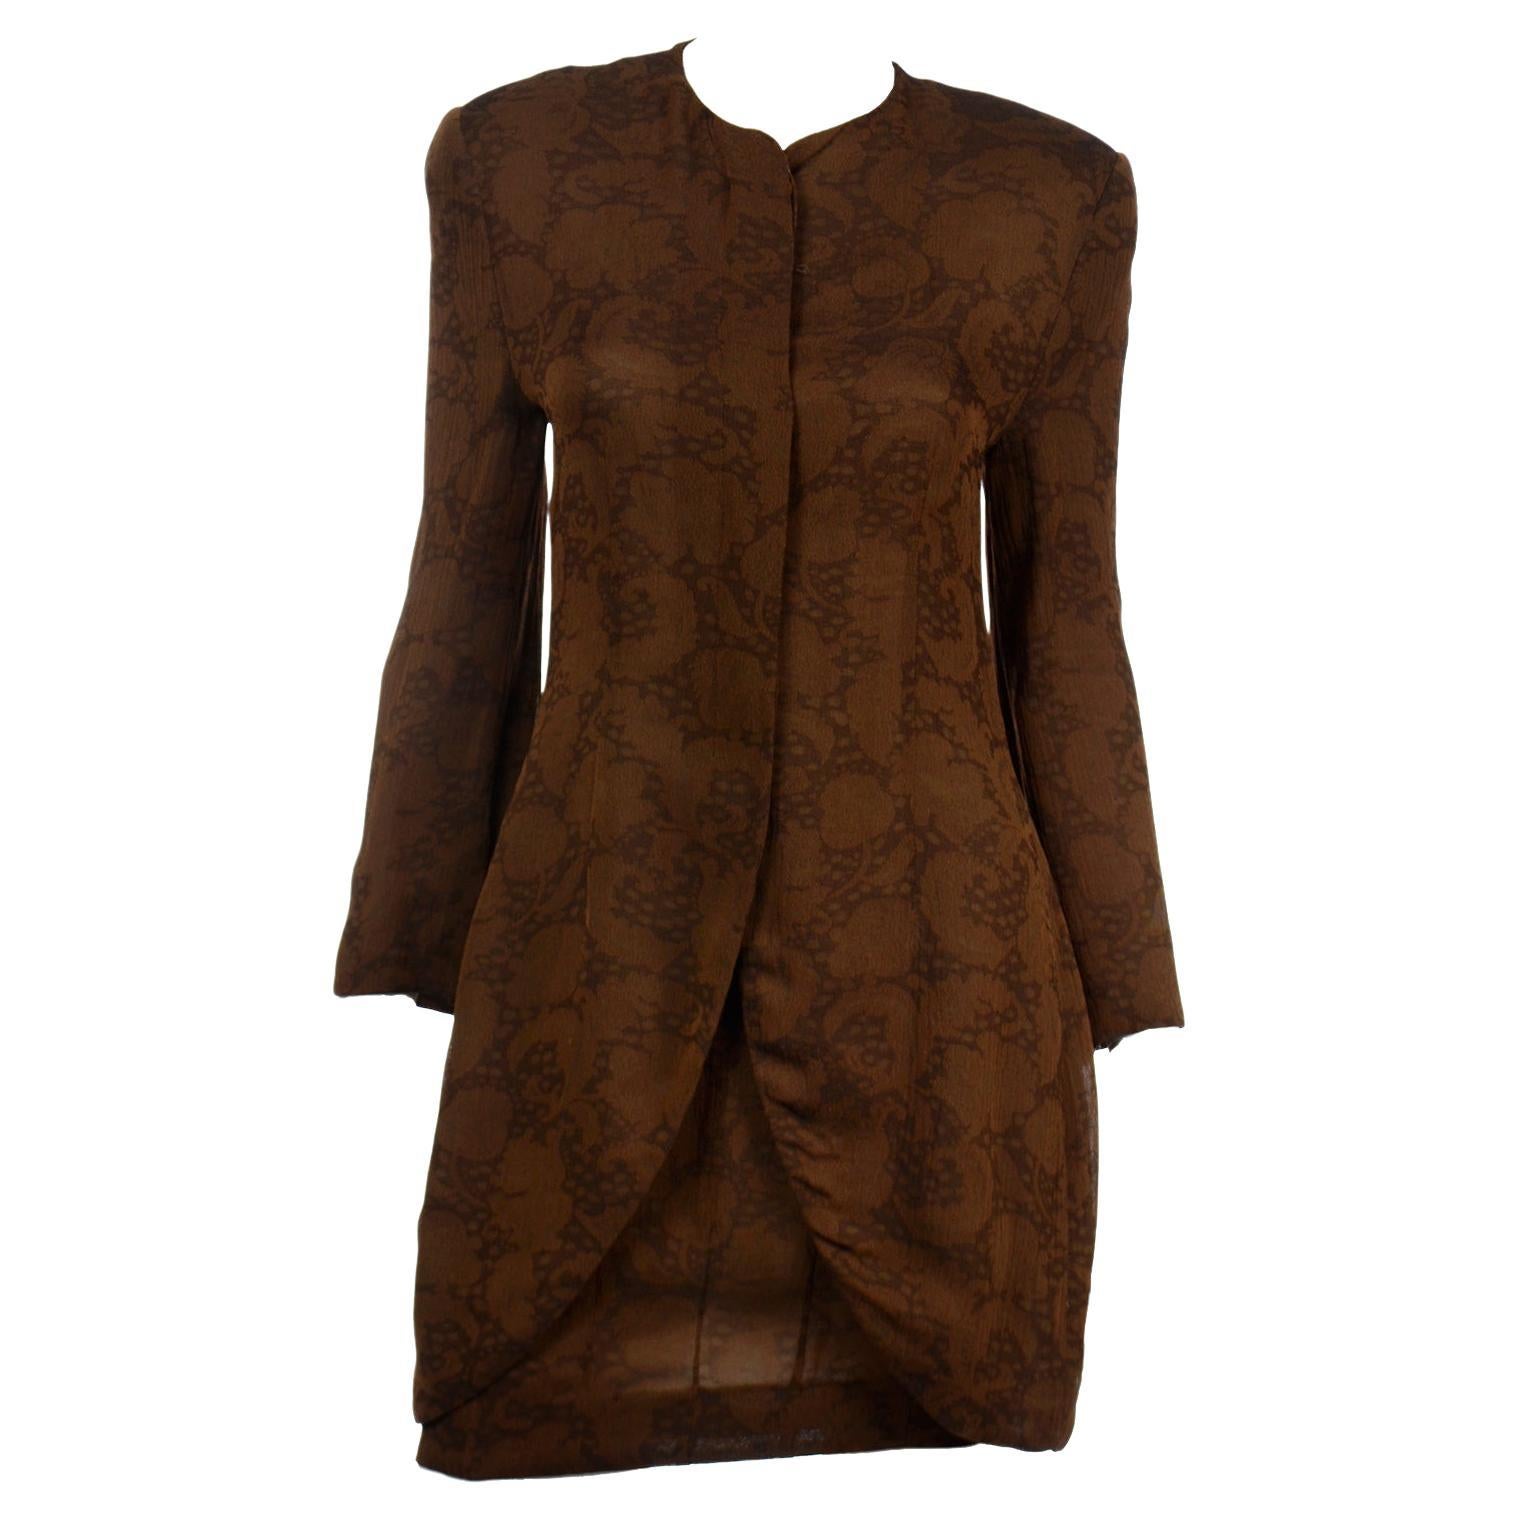 Vintage Giorgio Armani Silk Lined Textured Brown Skirt and Jacket Suit